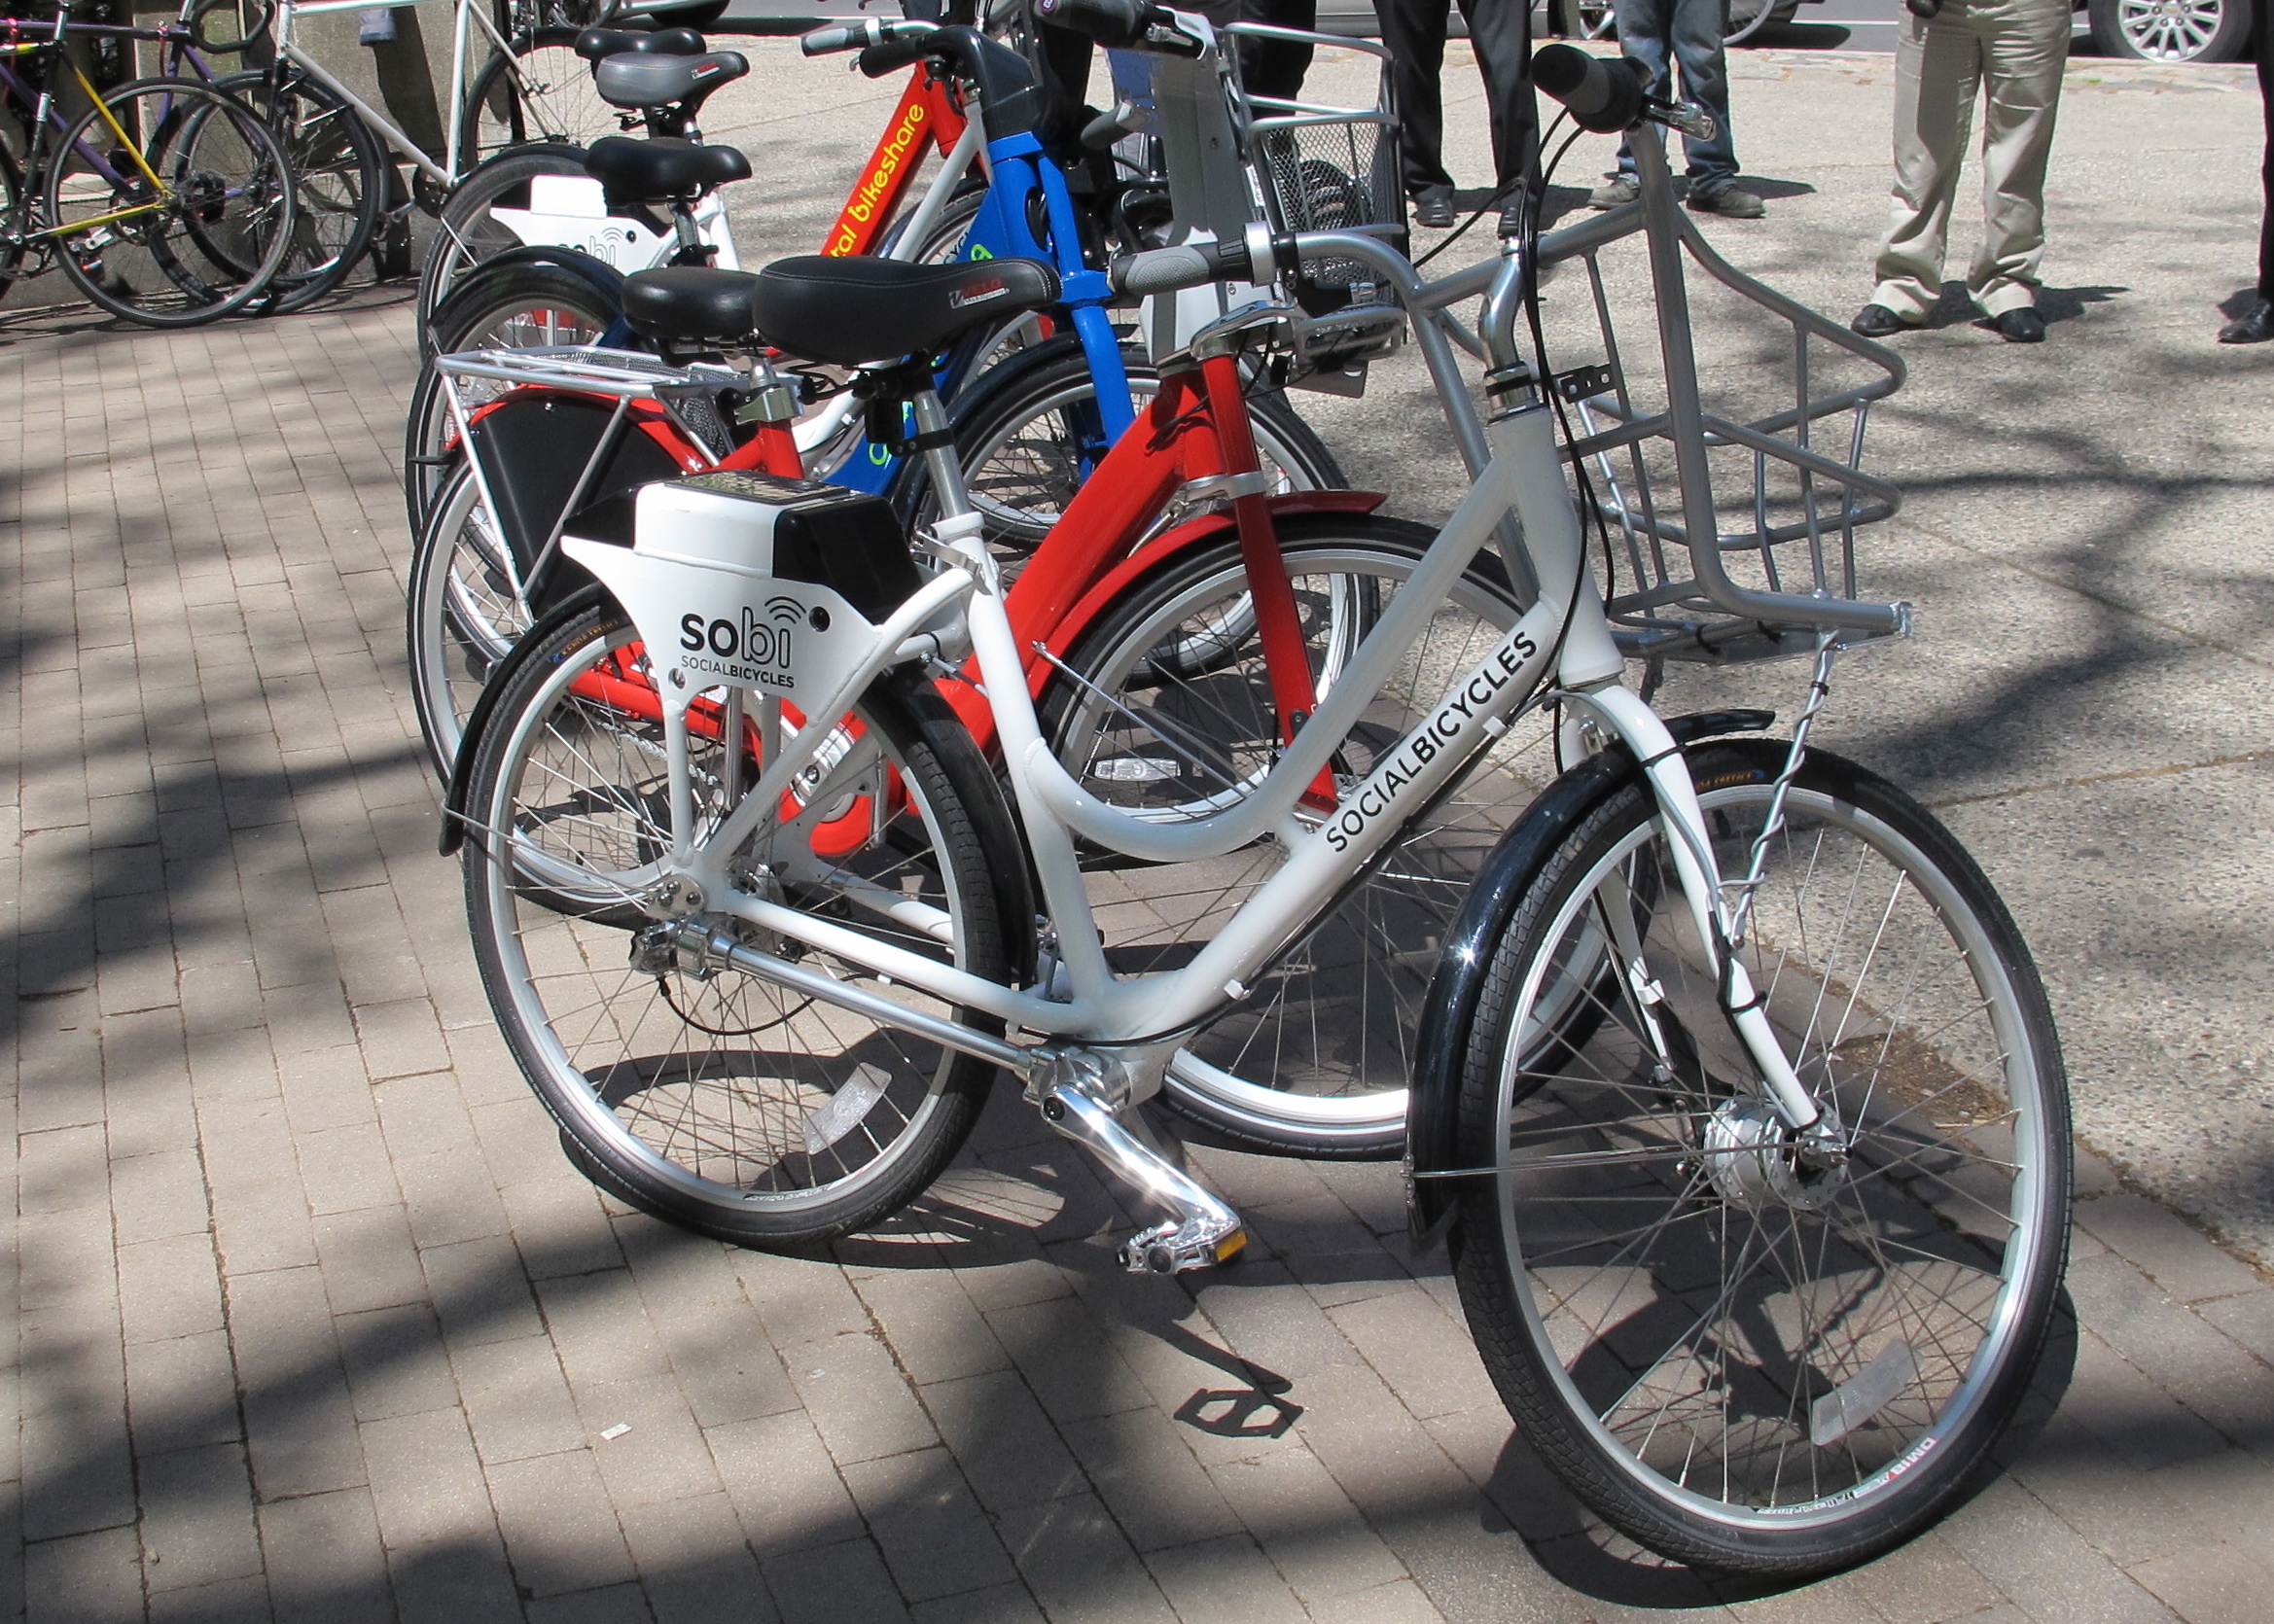 A Social Bicycle model